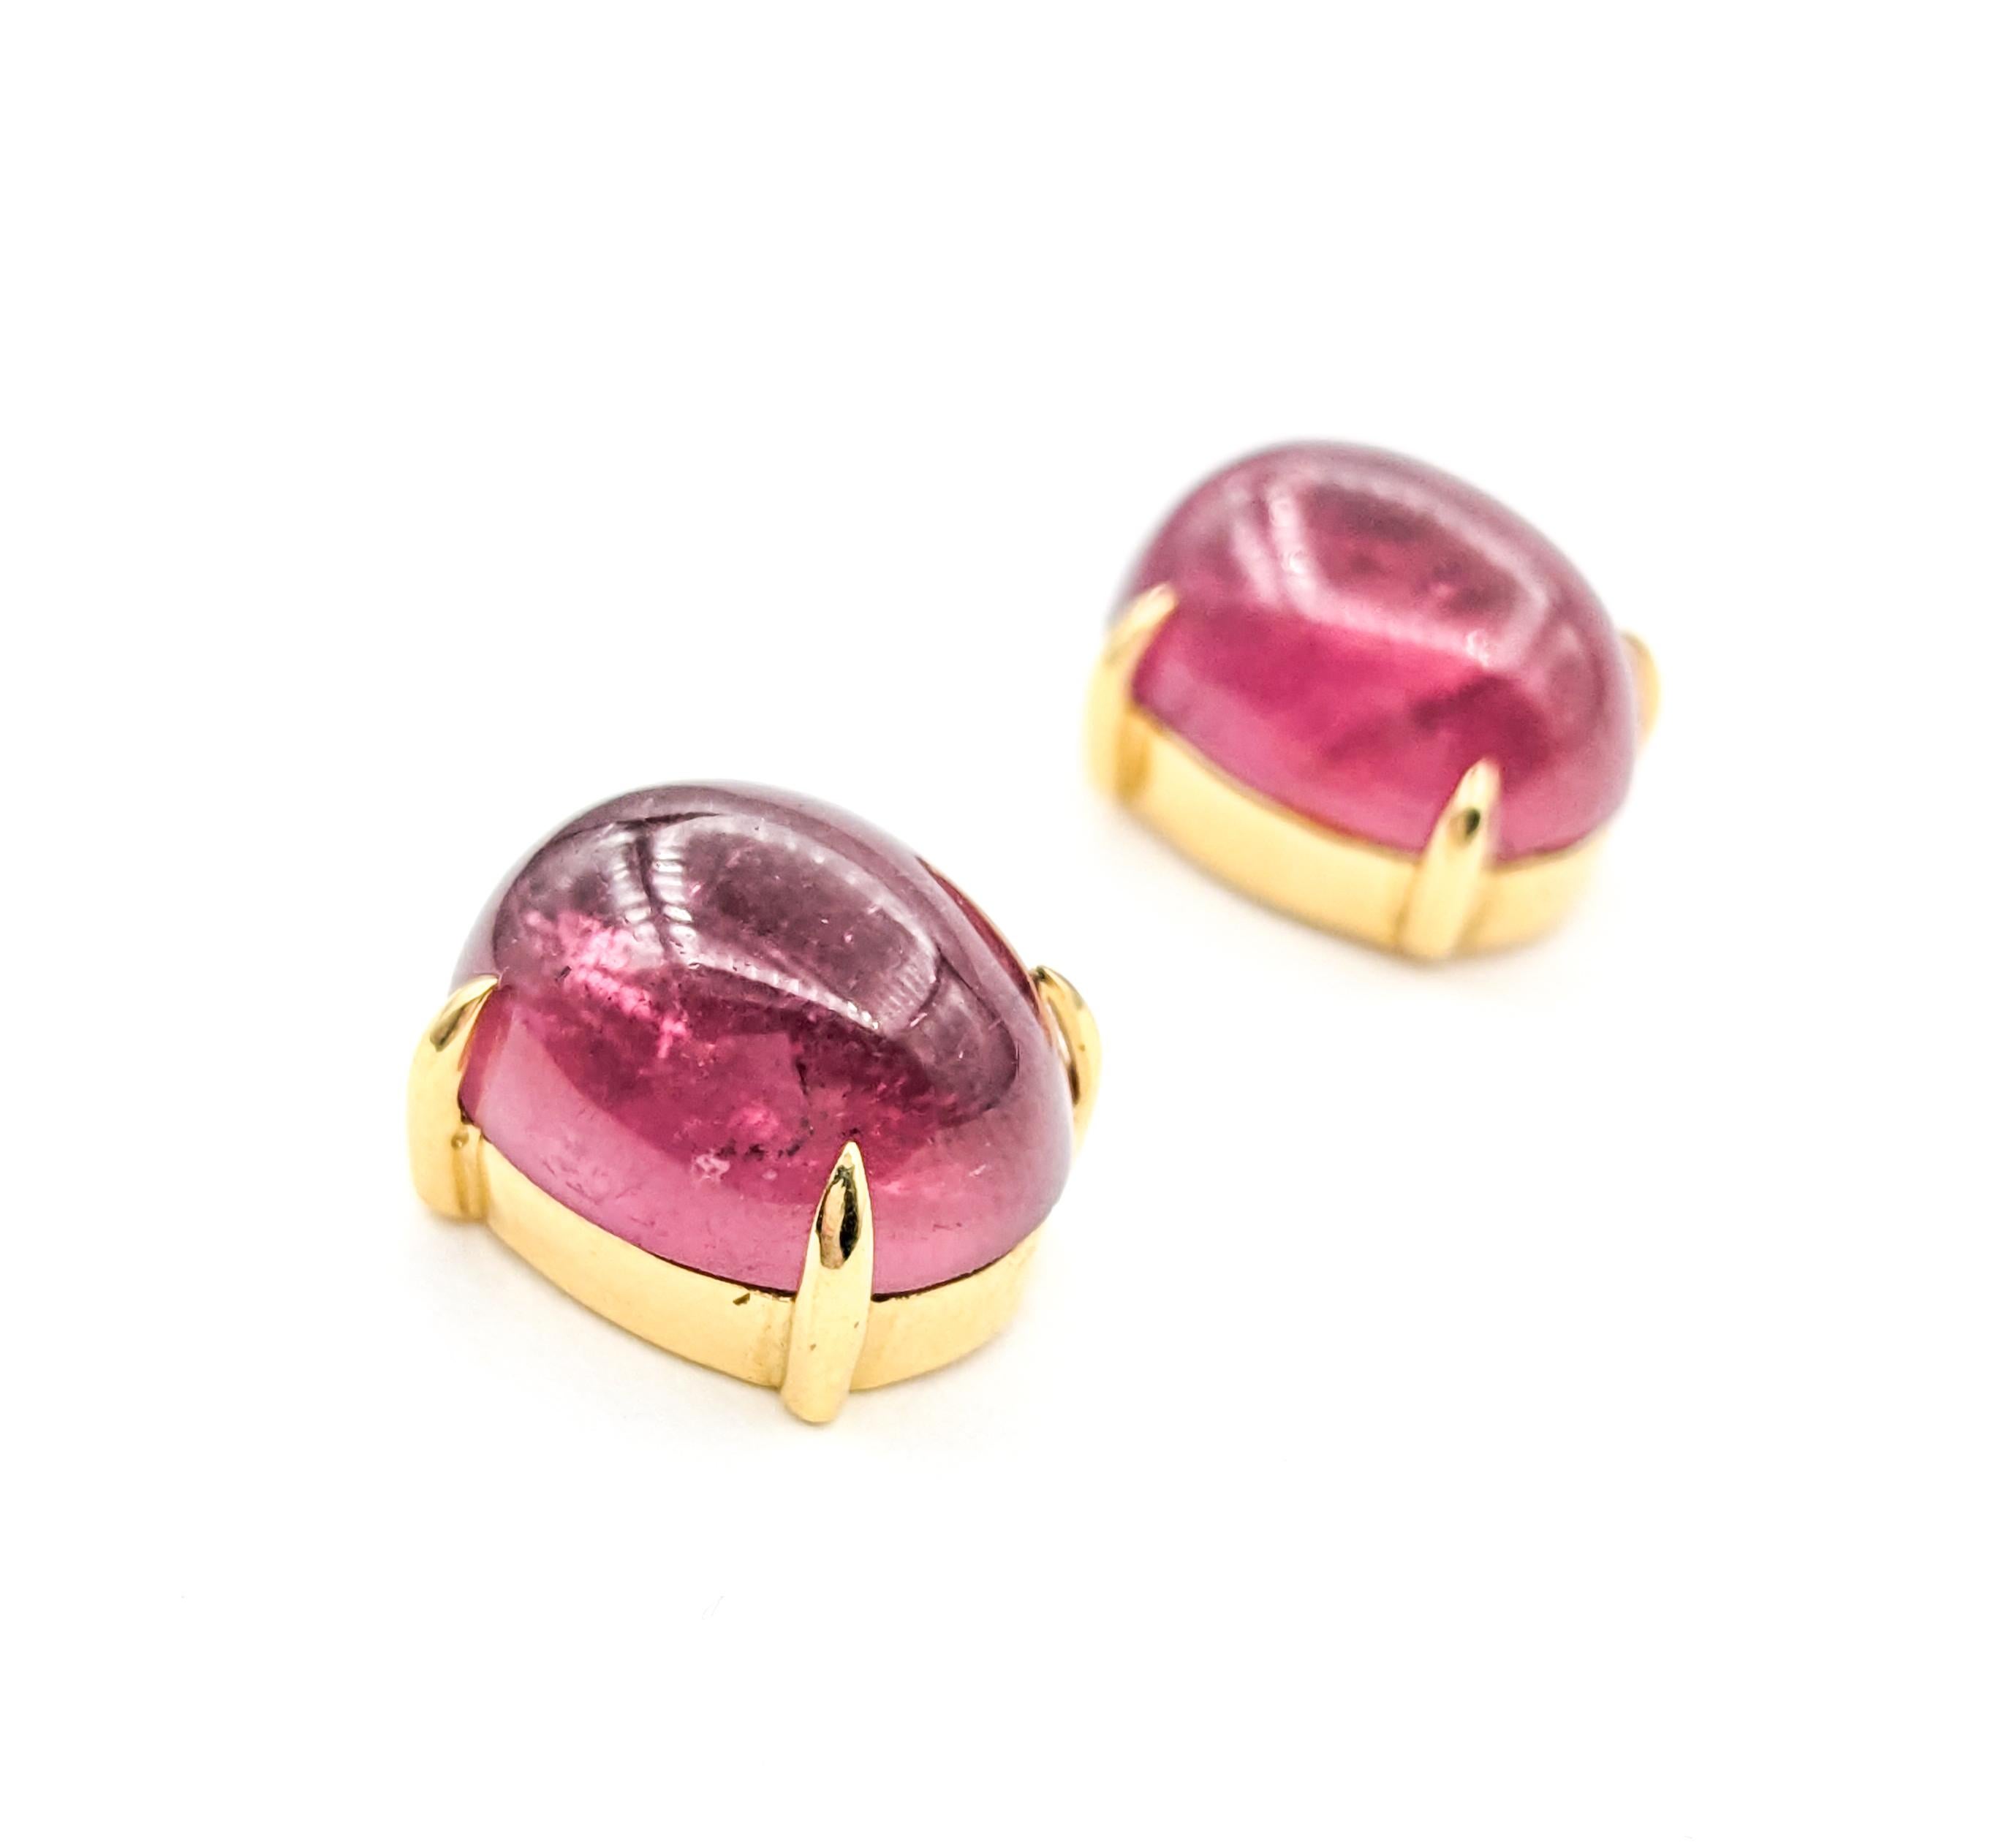 12ctw Pink Tourmaline Earrings In Yellow Gold In Excellent Condition For Sale In Bloomington, MN